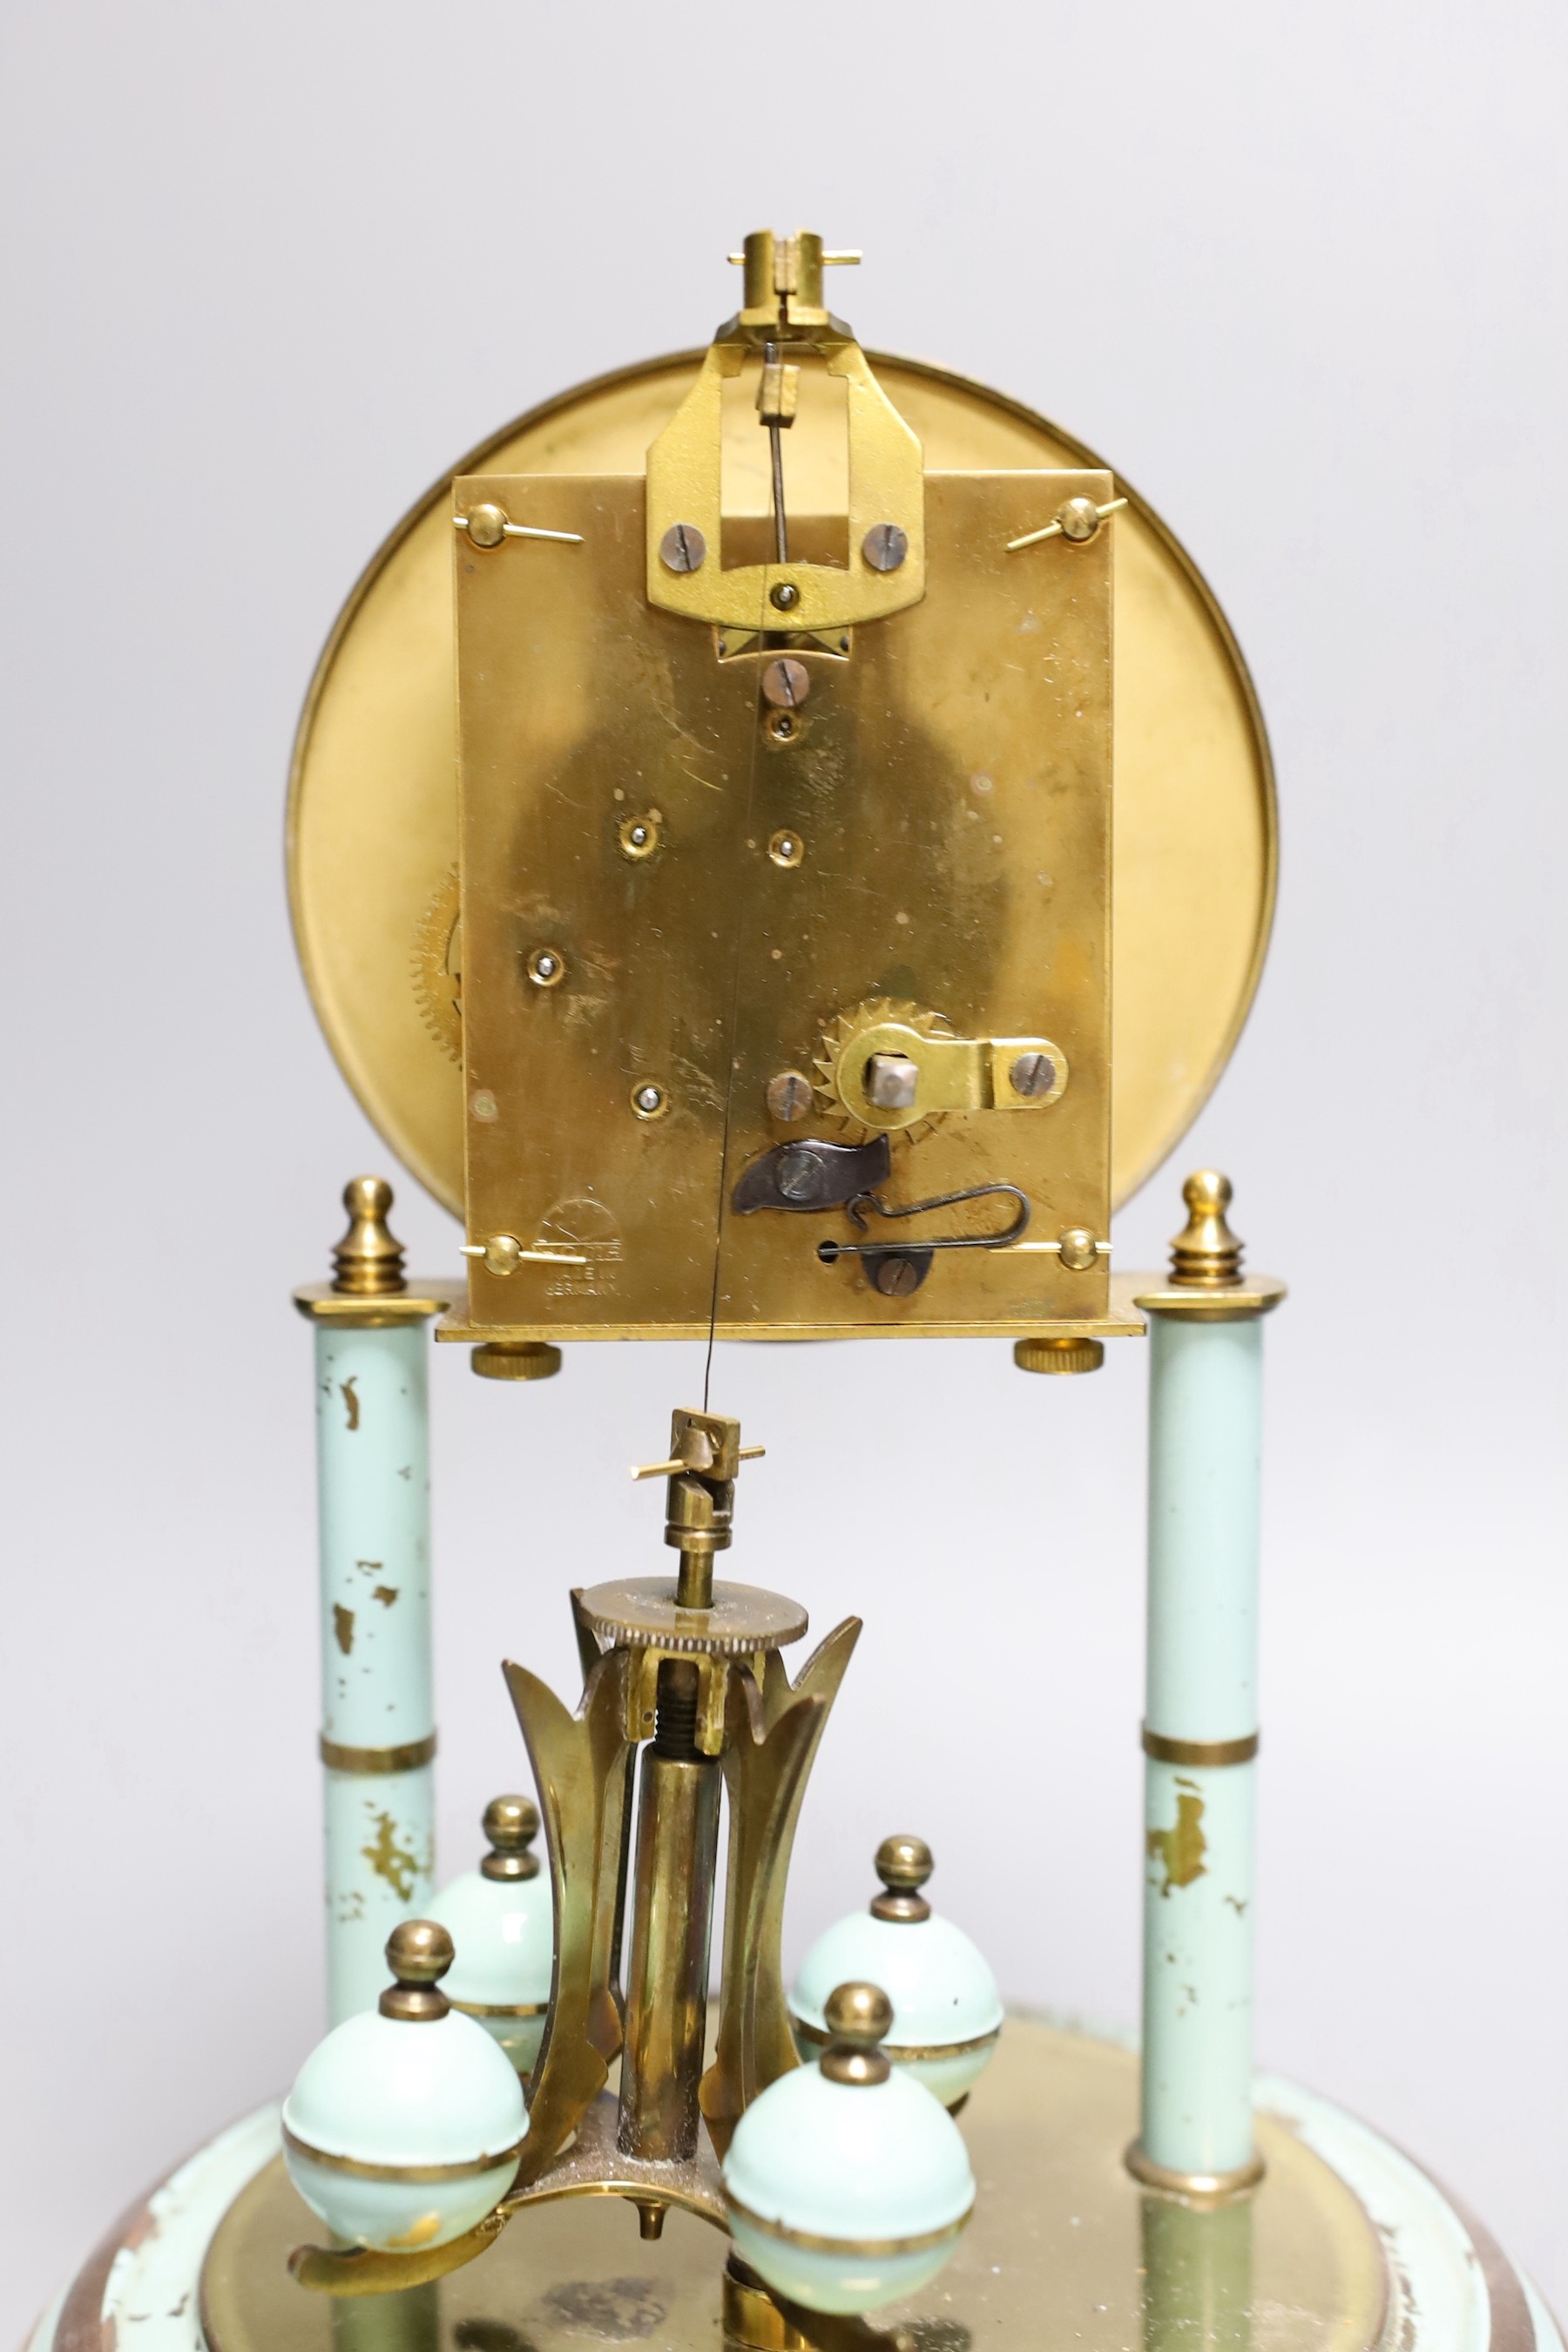 A German 400 day enamelled brass mantel timepiece, under a glass dome, 30cm total